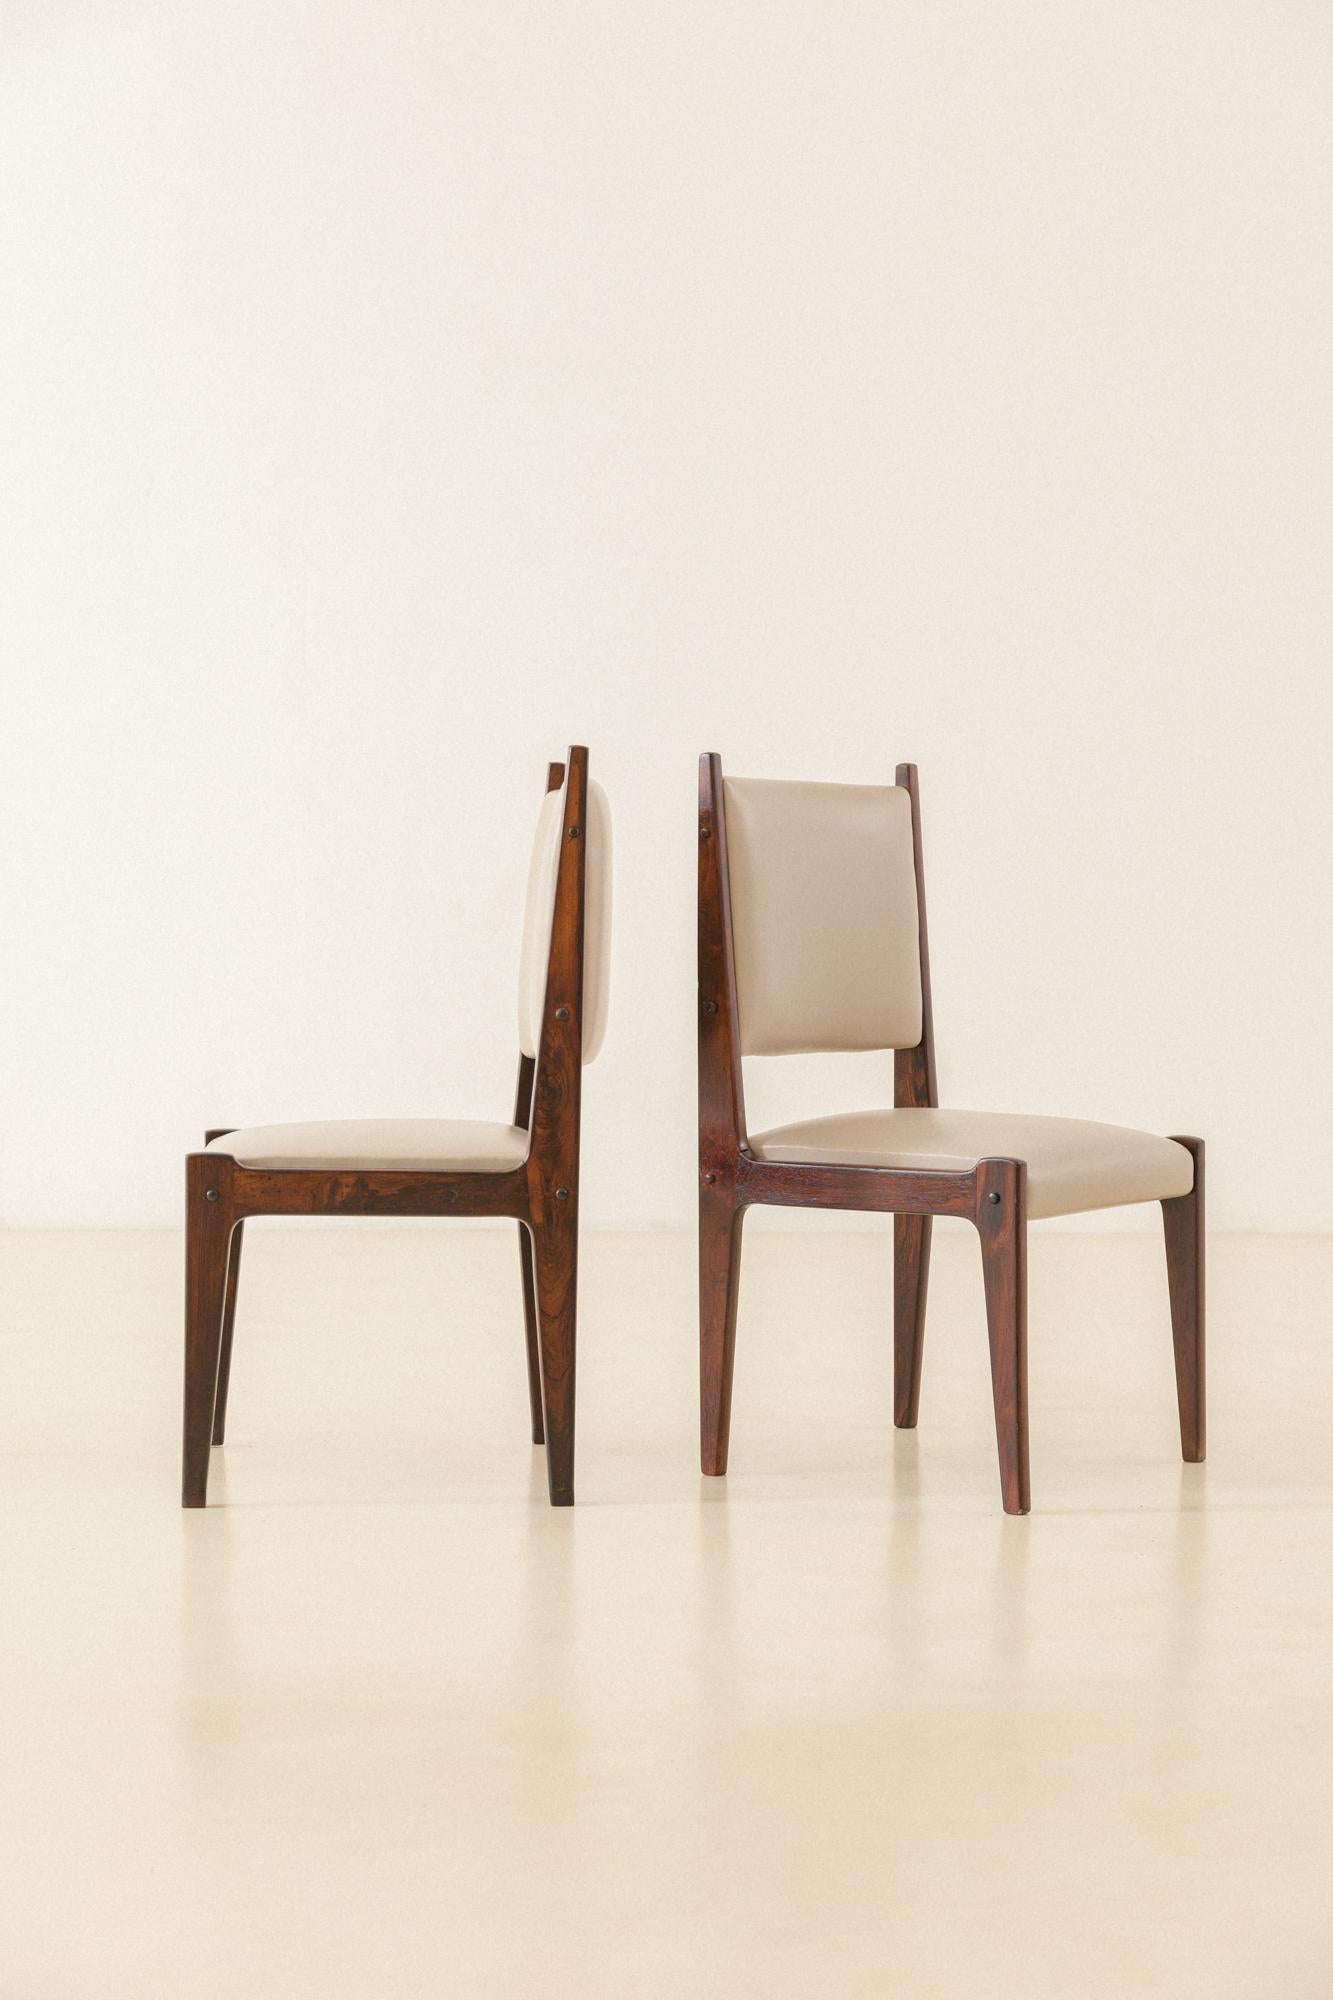 Mid-Century Modern Bloch Chairs by Sergio Rodrigues, Brazilian Midcentury Design, 1964 For Sale